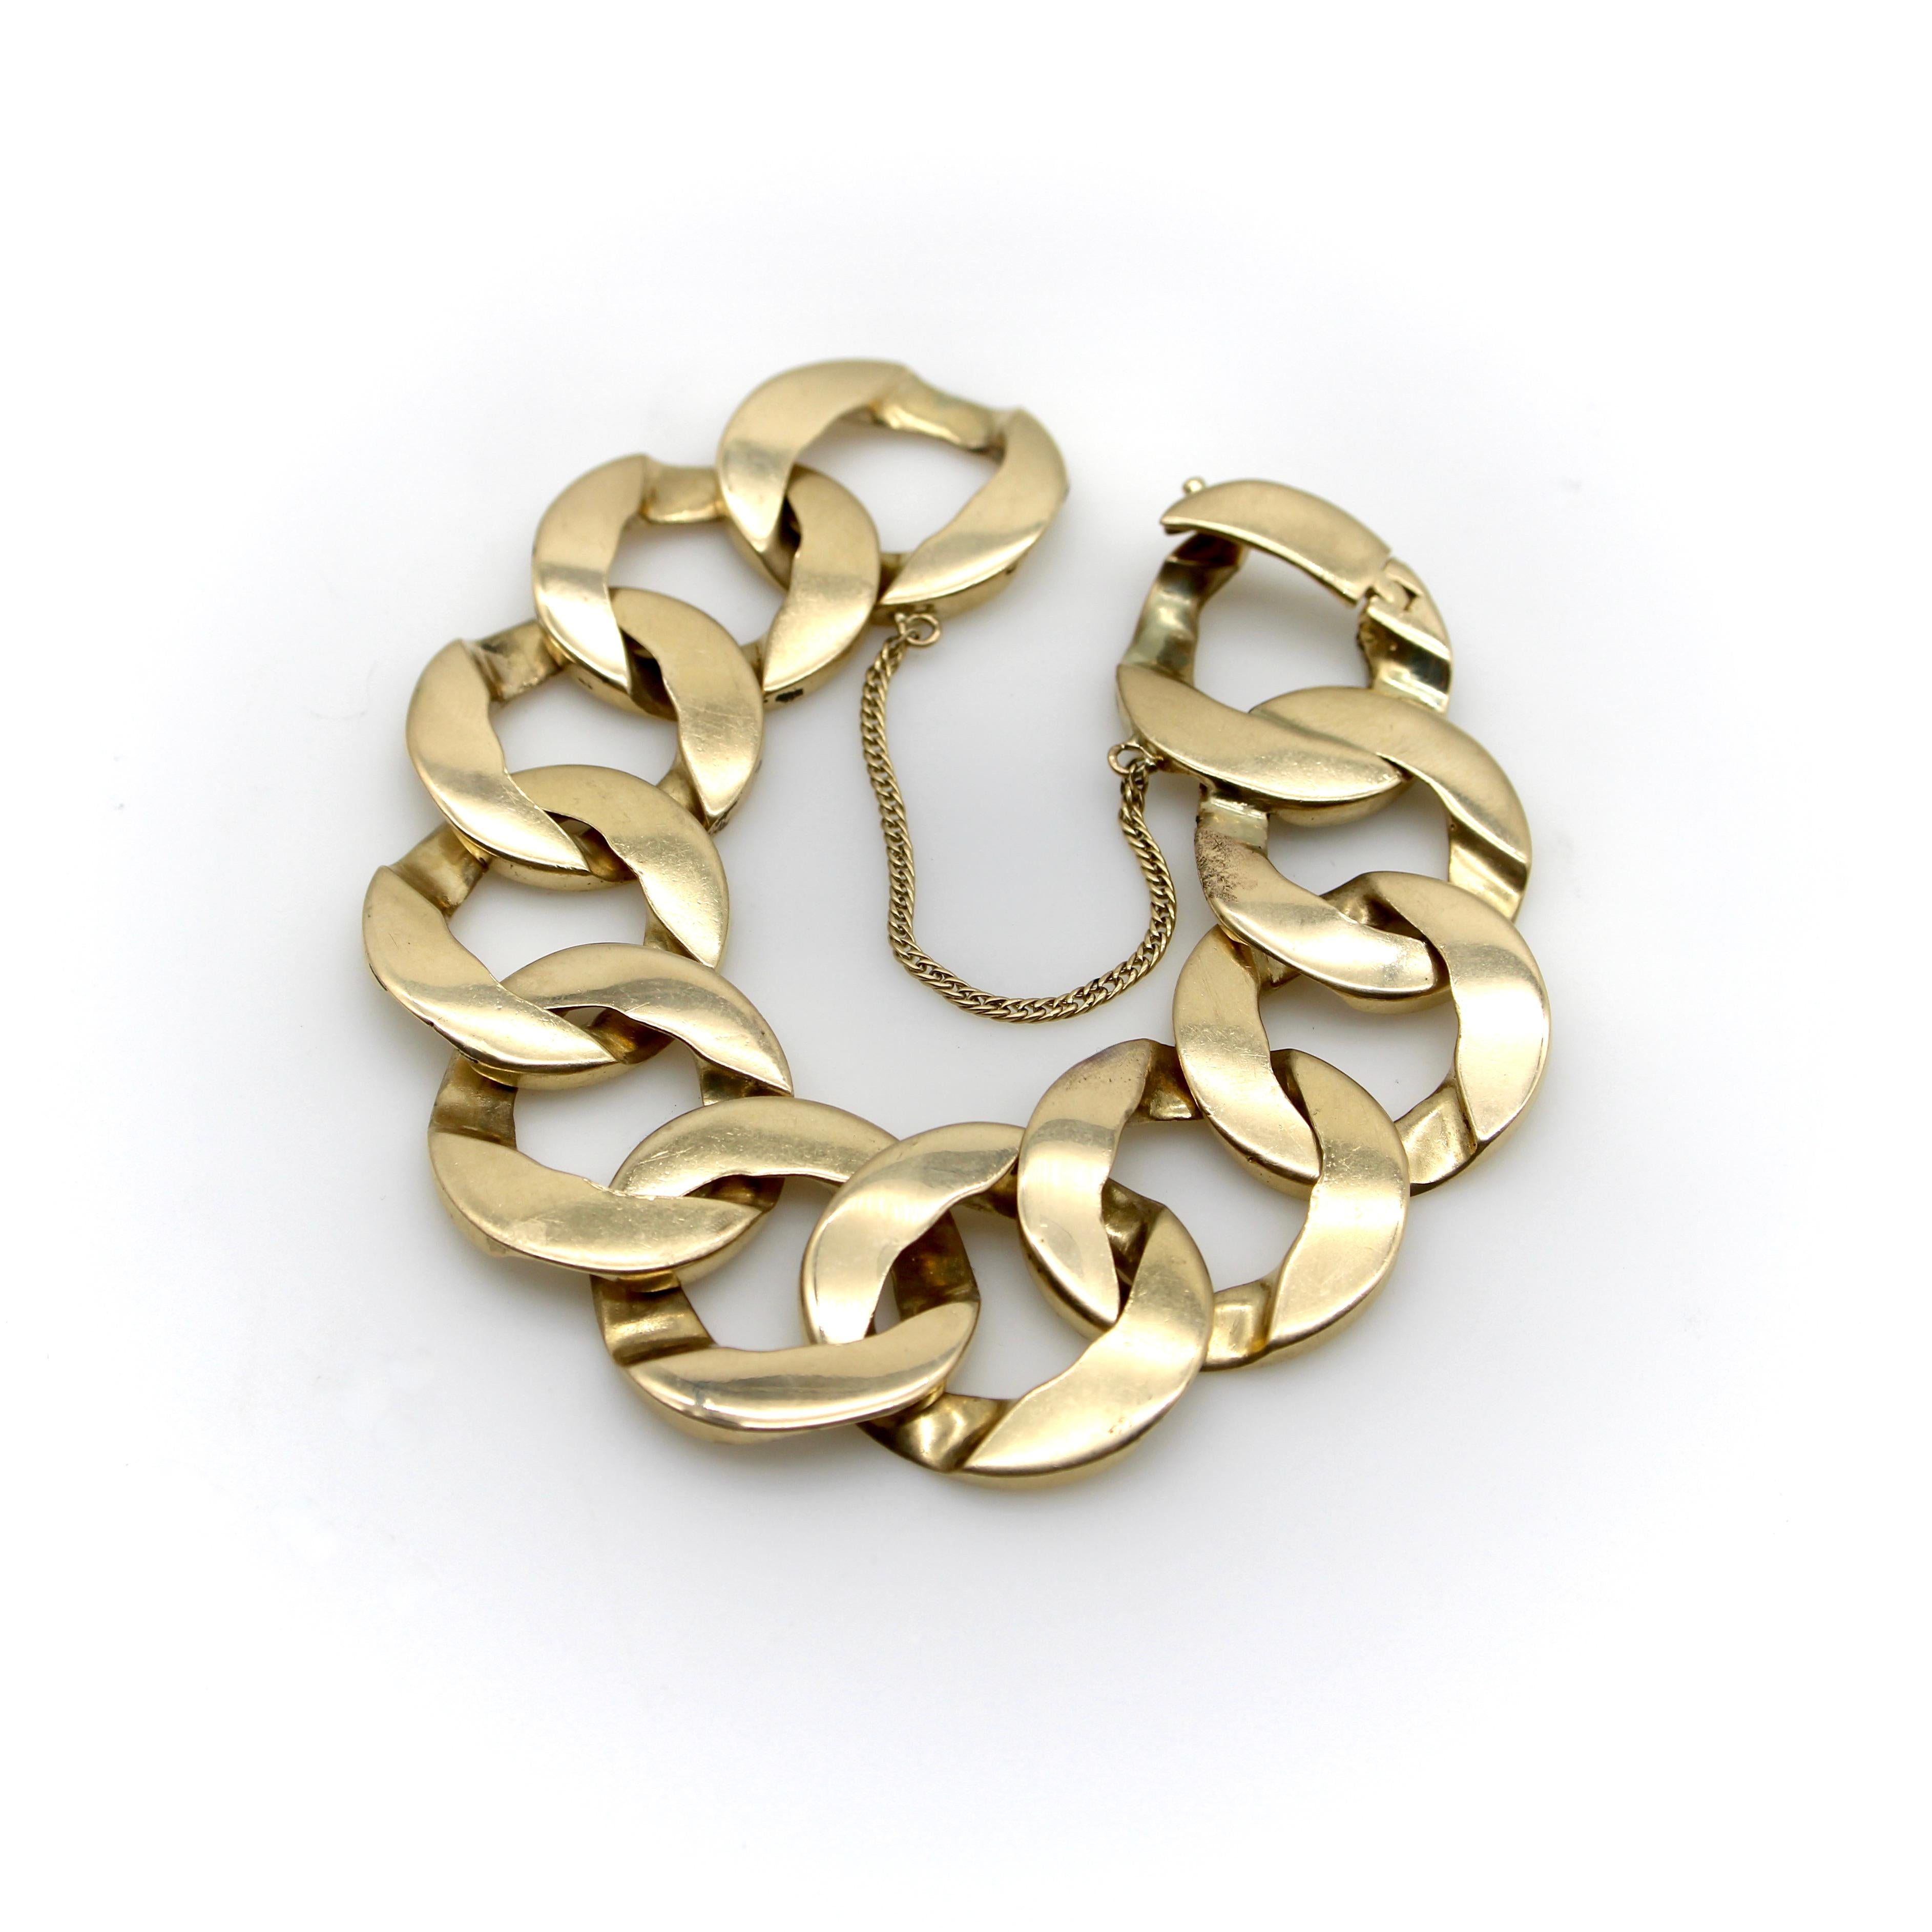 This is an iconic wide flattened curb link bracelet in 14k gold. The design was made famous by Greta Garbo in 1941 when she was rarely seen without one on each wrist. Now this curb link is a truly sought after piece! The beautiful flattened wide